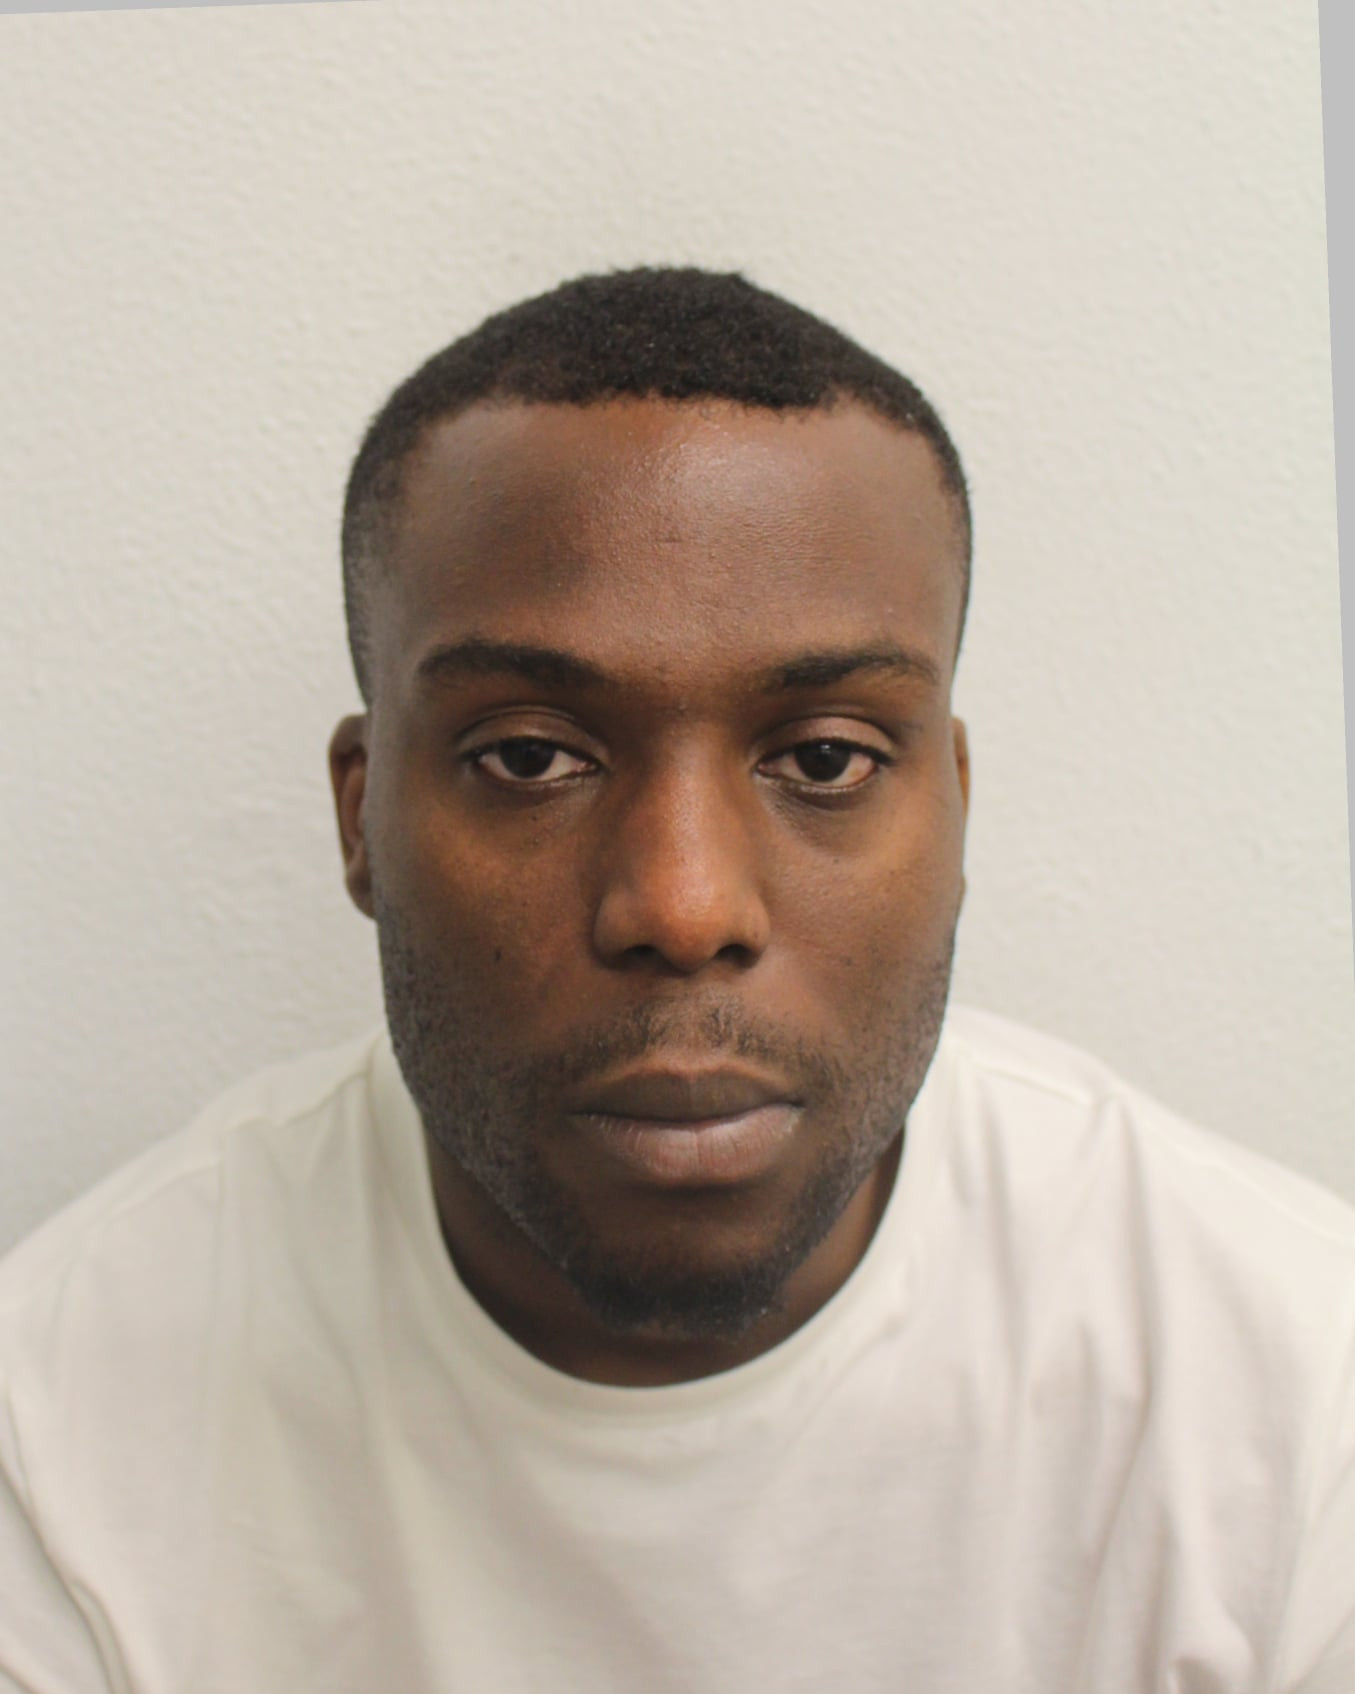 28-Year-Old Nigerian Man Jailed For Raping Woman In The UK